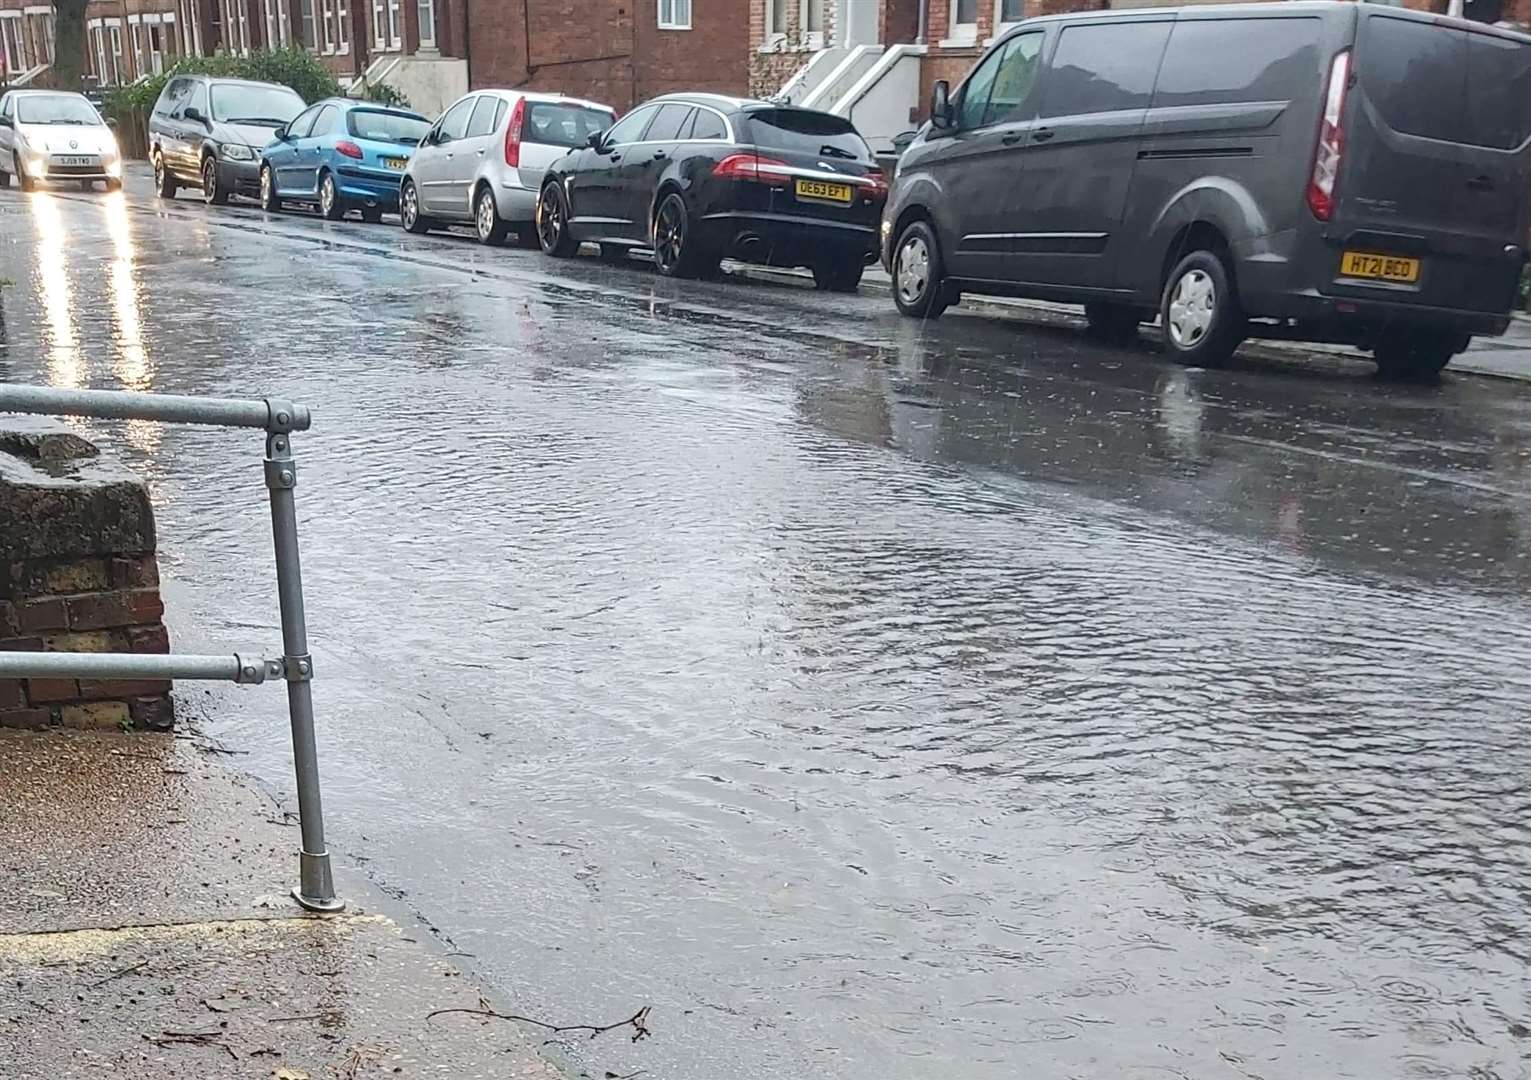 Roads were described "like rivers" in Folkestone. Picture: Katie Paine from November 3